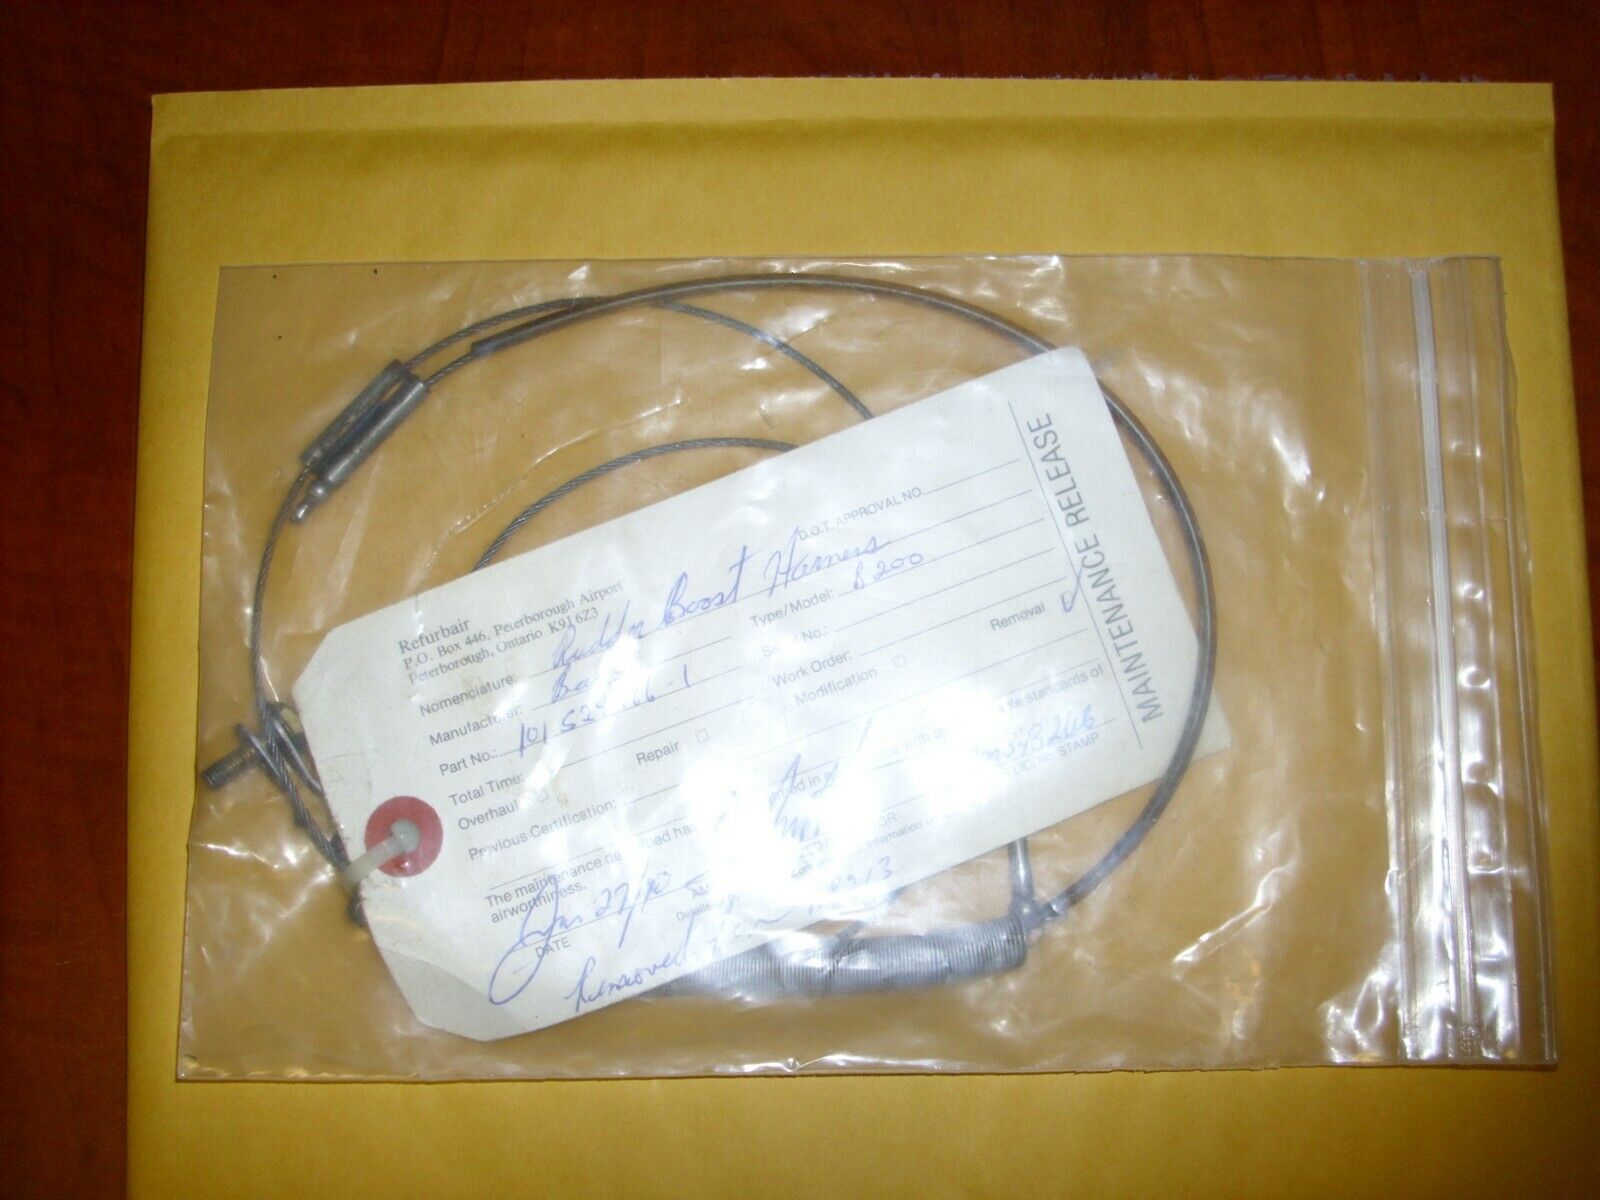 Beechcraft King Air Rudder Boost Cable 101-524186-1